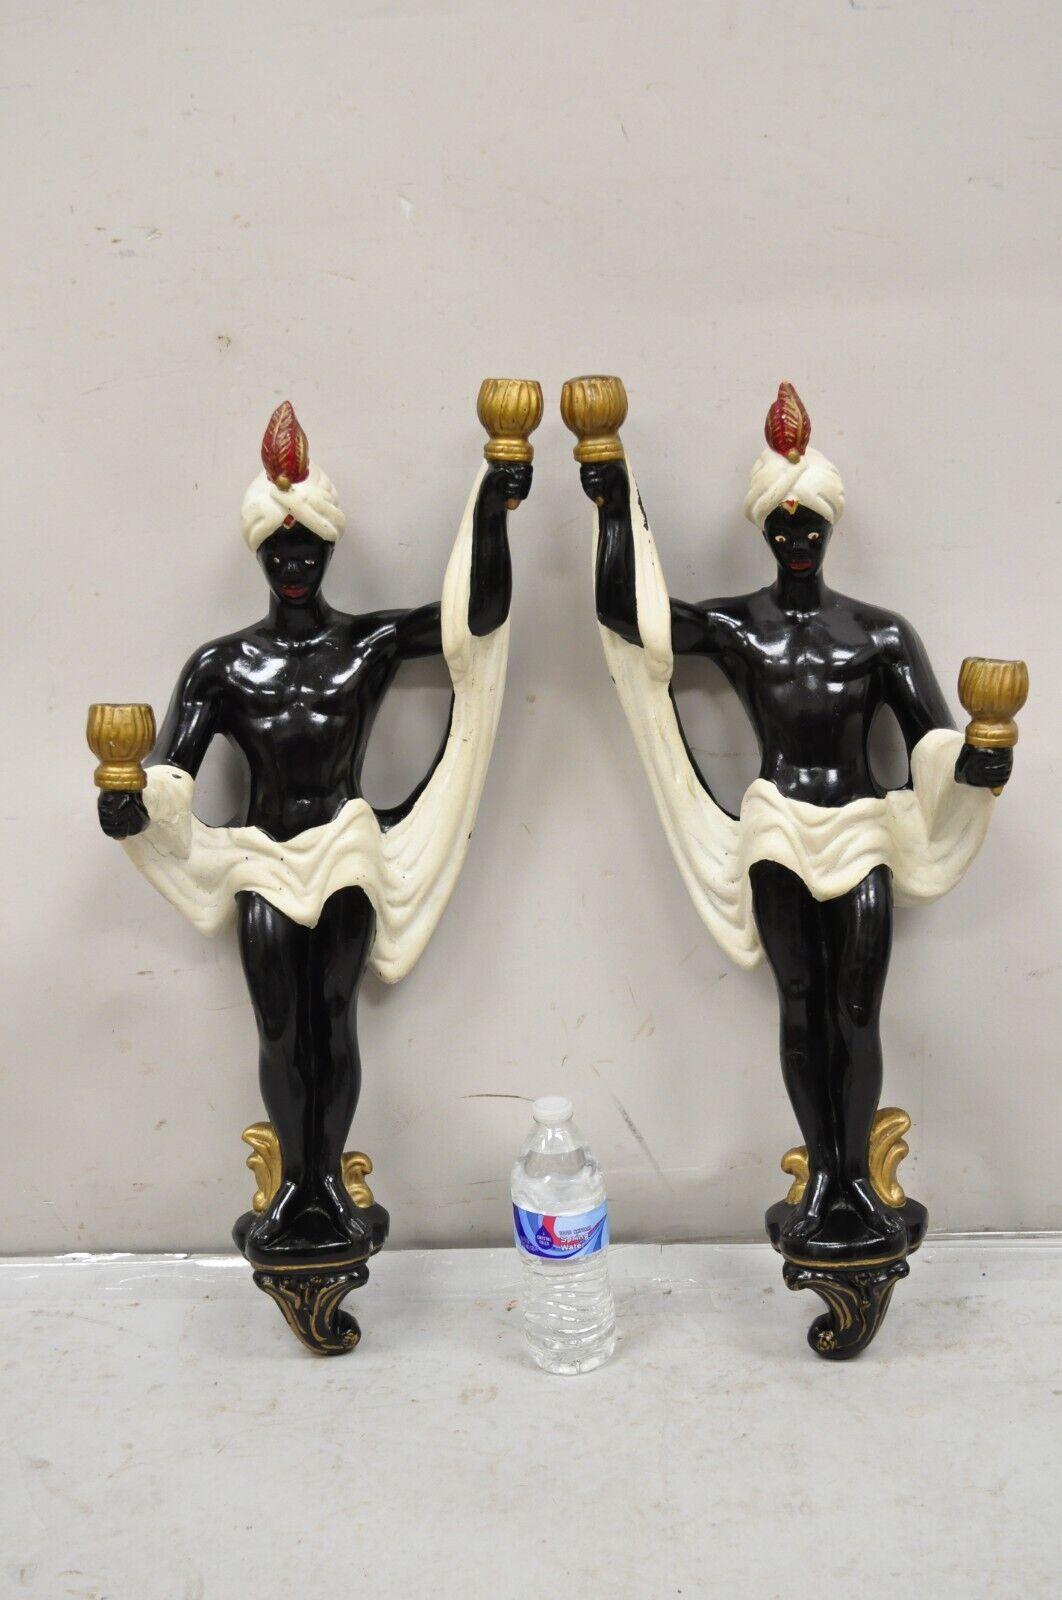 Vintage Arabian Chalkware Male Figural Wall Sconce Candlesticks - a Pair. Item featured is right and left facing, original paint, two candlesticks each, very nice vintage set. Circa Early to Mid 20th Century. Measurements: 28